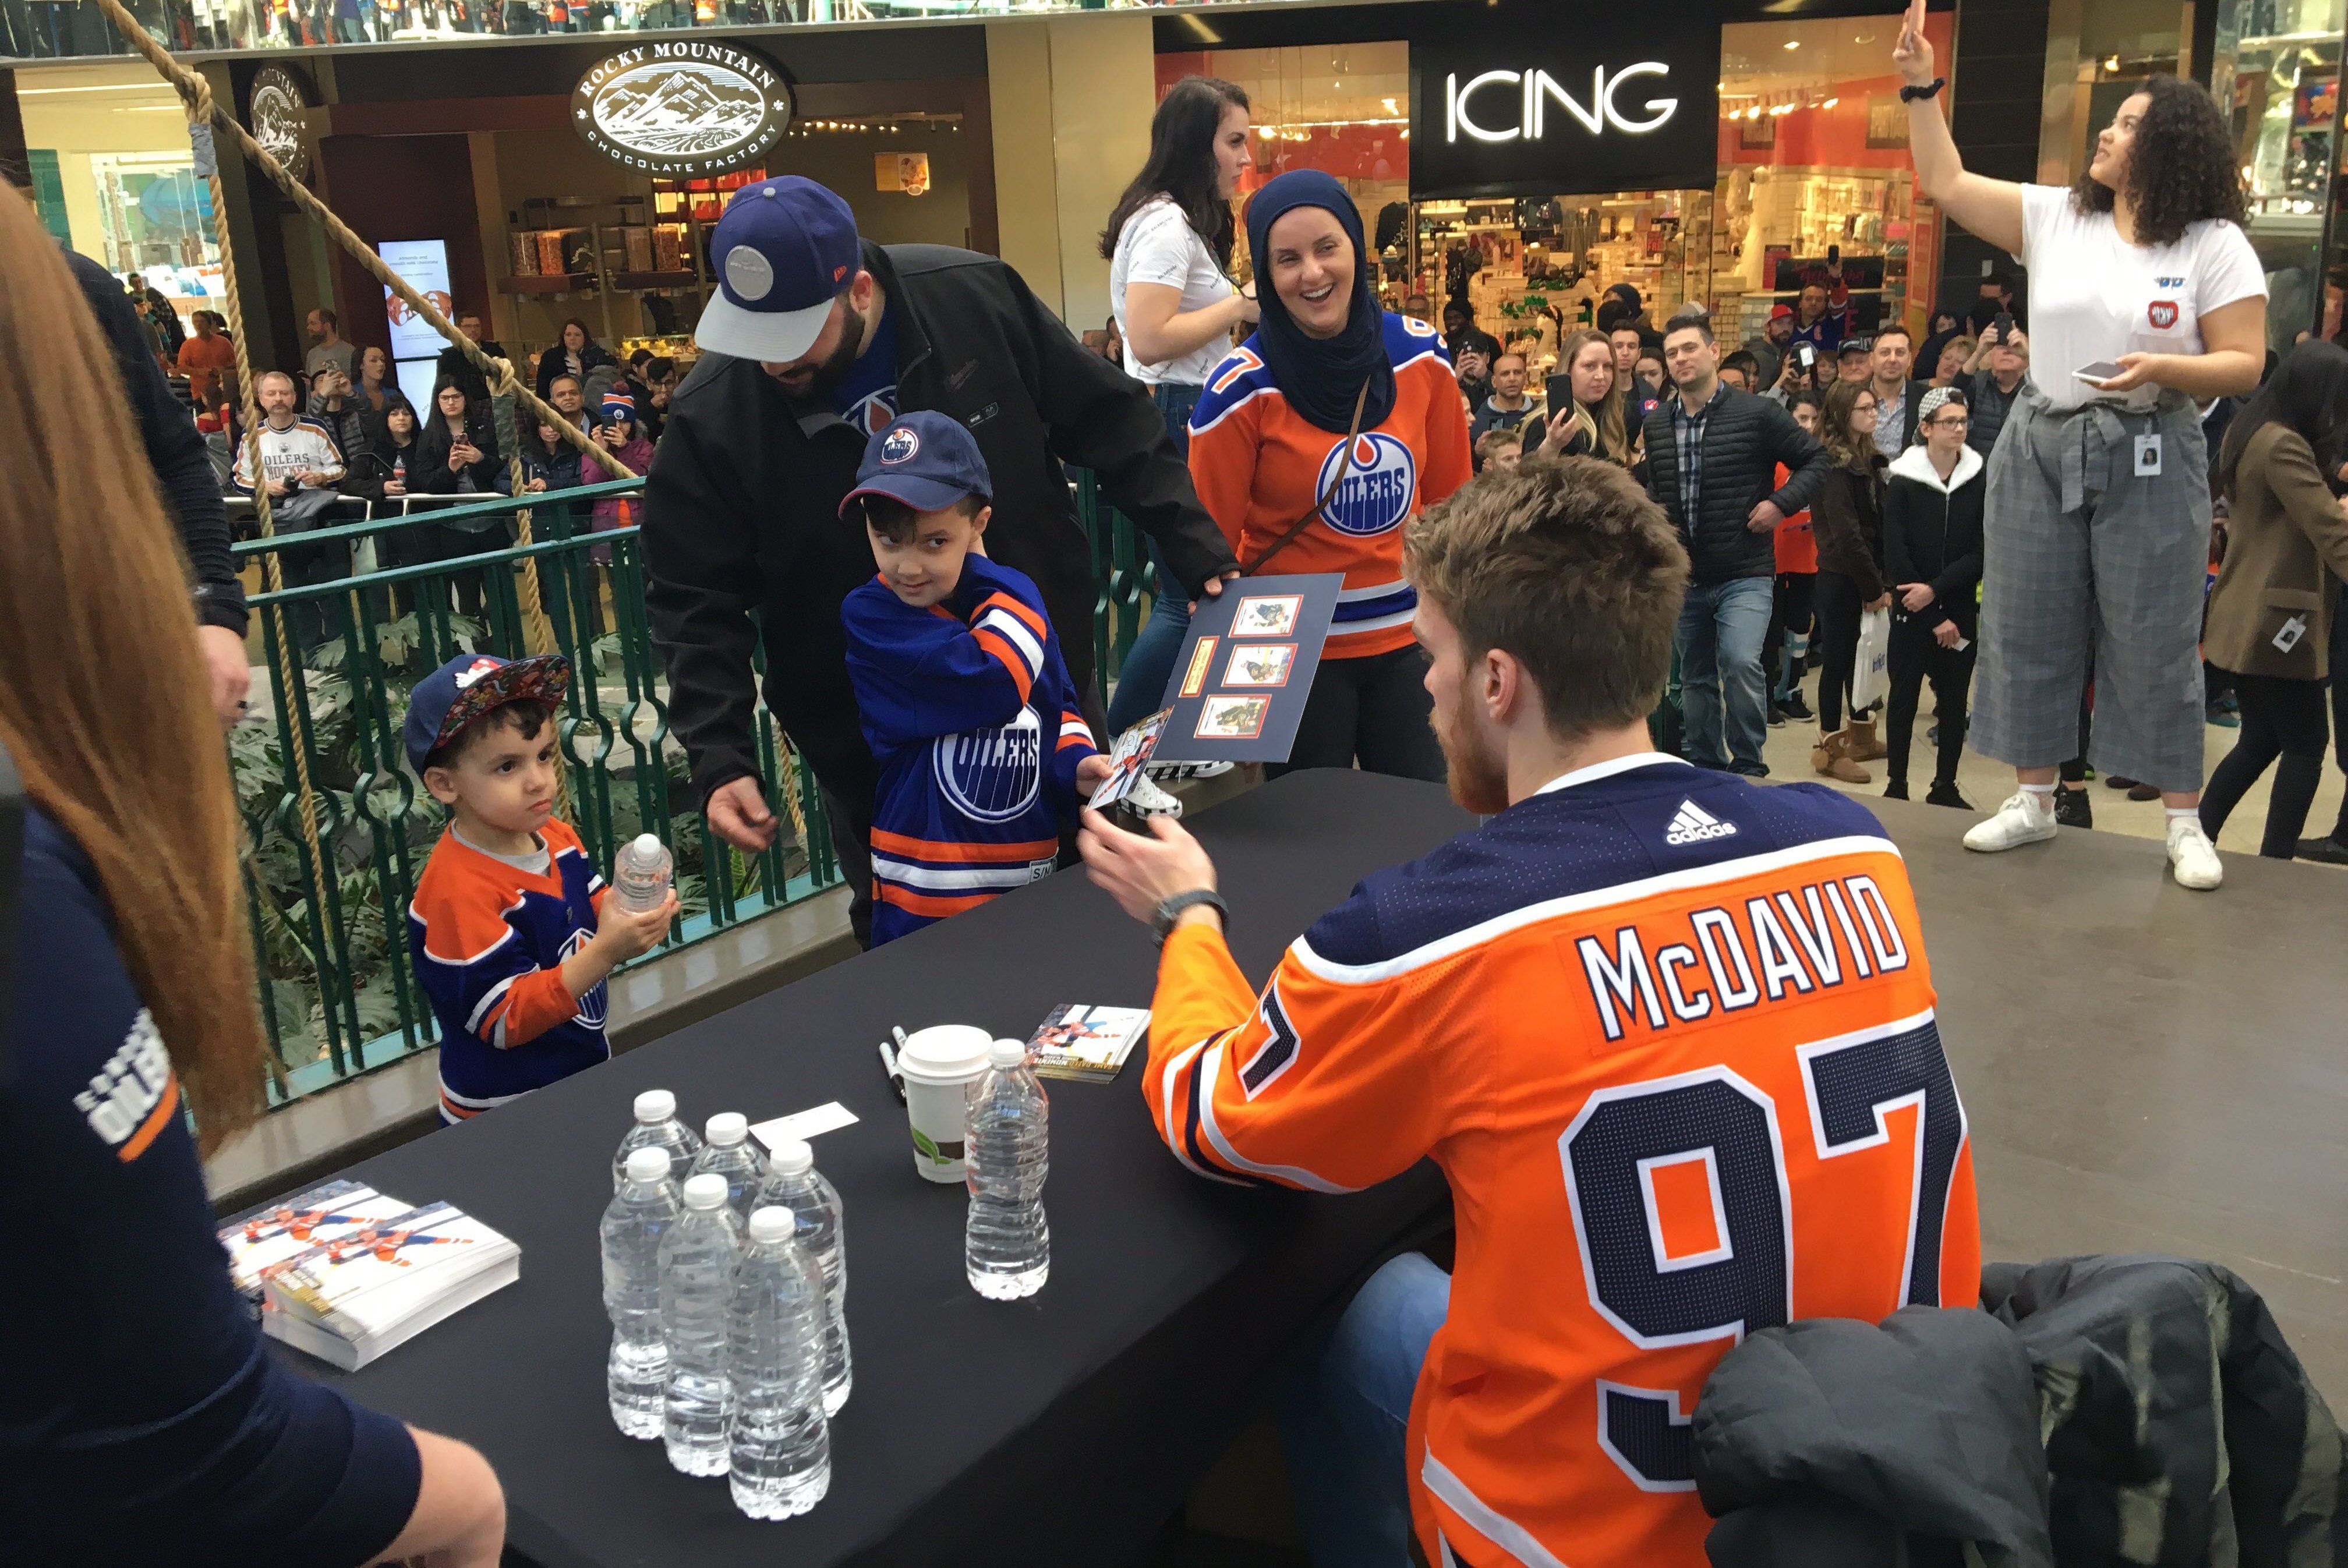 Edmonton Oilers captain Connor McDavid signing Upper Deck photos at the team's public autograph session at West Edmonton Mall on Monday, February 18, 2019. 